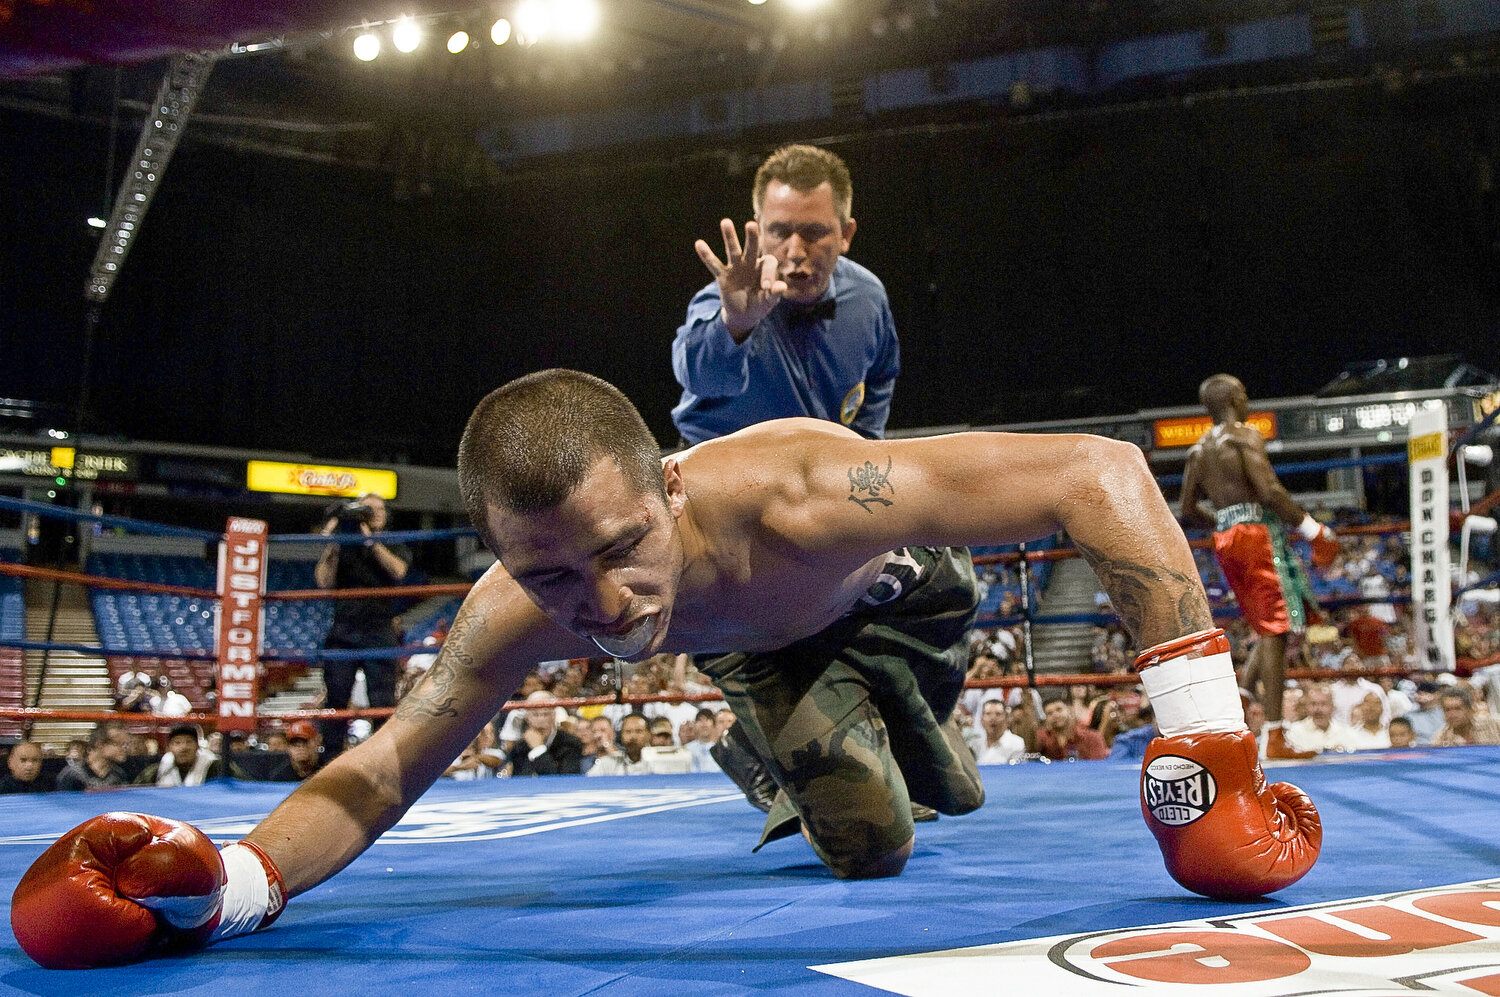  Featherweight title contender Roger Gonzalez of Chino (27-1, 18 knockouts) struggles to get up after being knocked down by Cornelius Lock of Detroit (17-3, 10 KOs) in the tenth round at Arco Arena in Sacramento, Calif., Wednesday June 18, 2008.  Sec